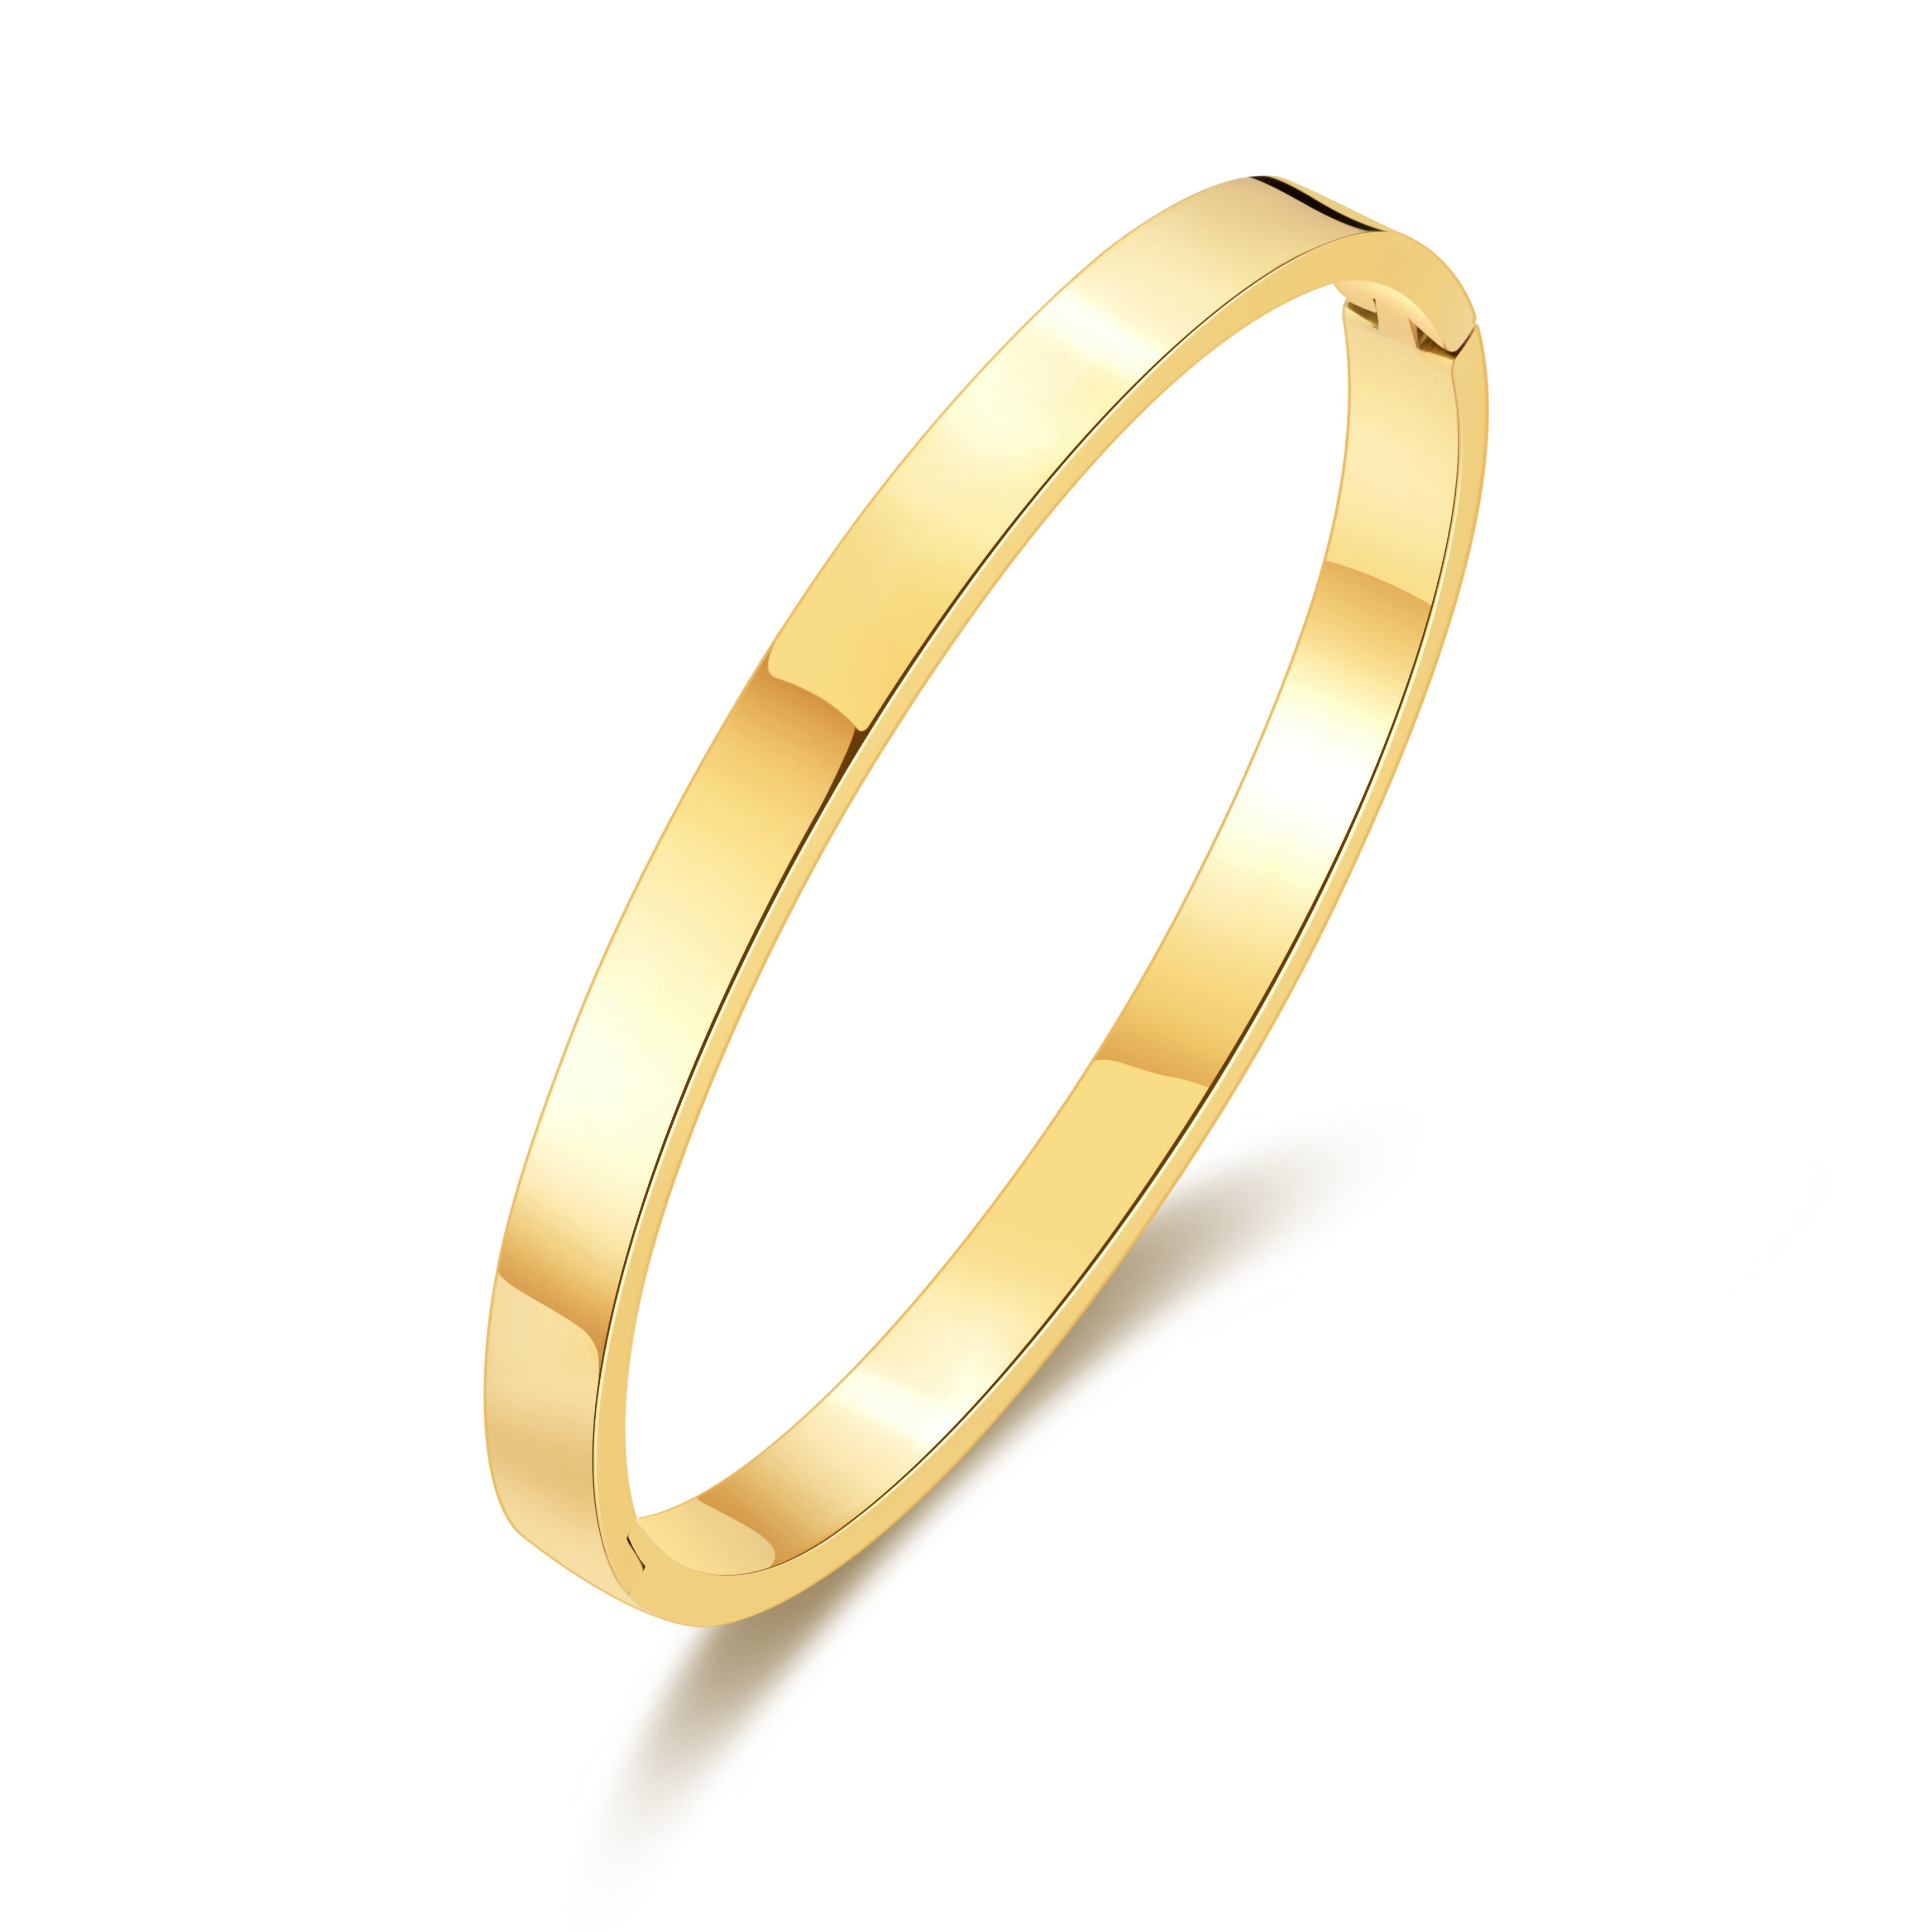 Gold Plated Stainless Steel Polished Bangle by Philip Jones Jewellery